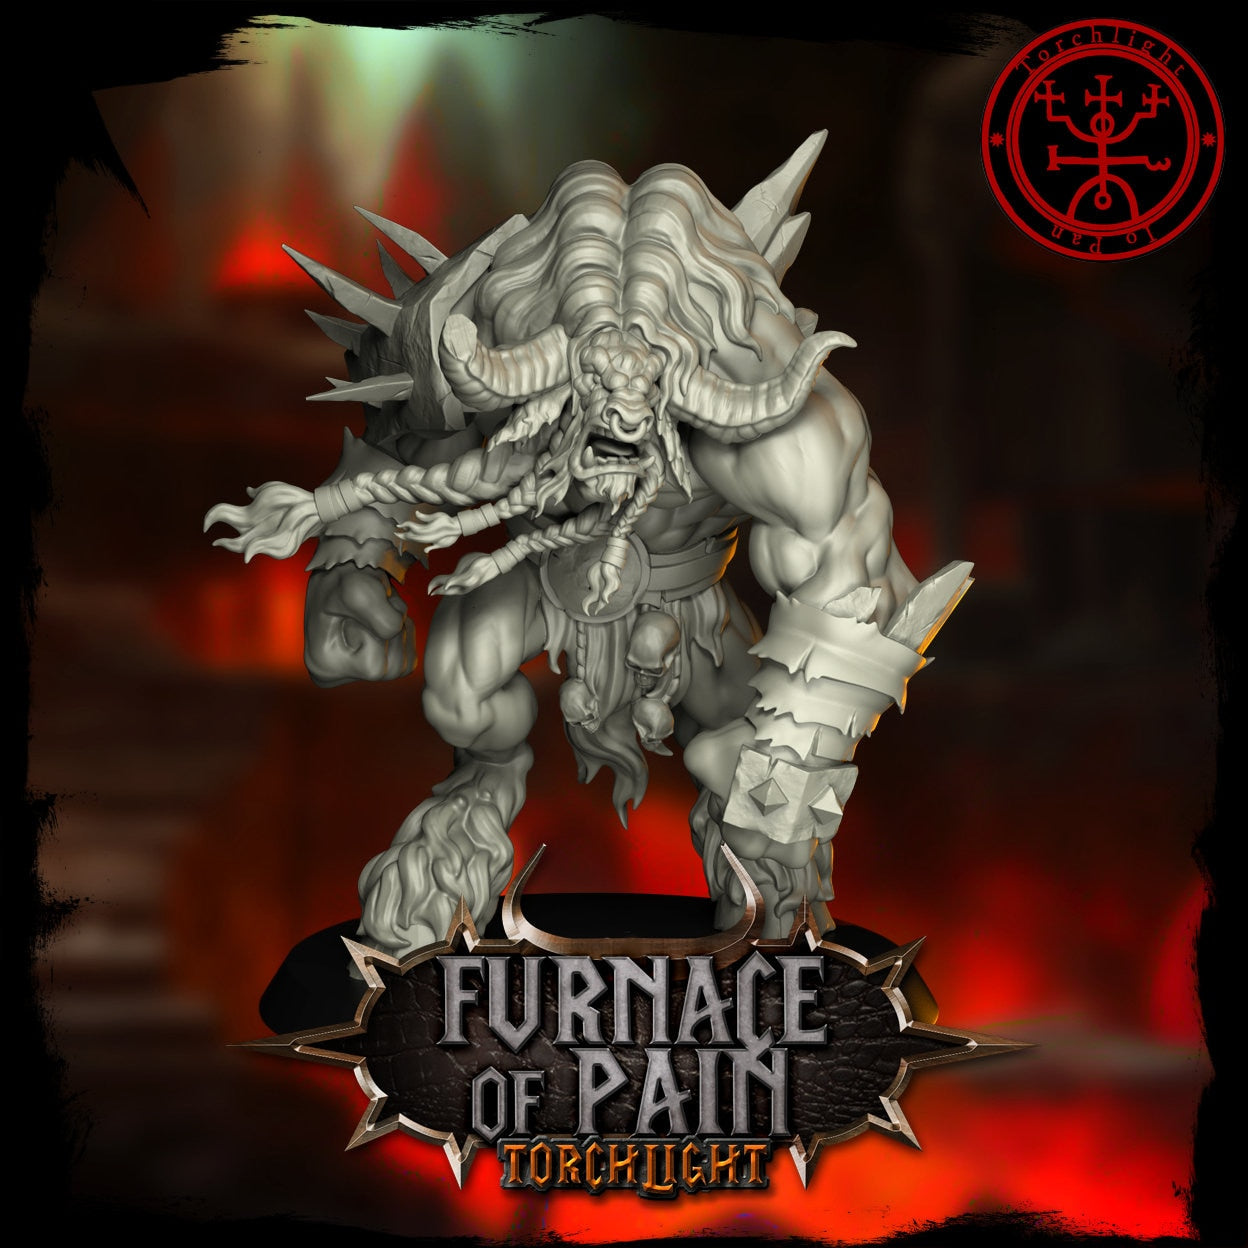 The Furnace of Pain- Full Chaos Dwarf Team